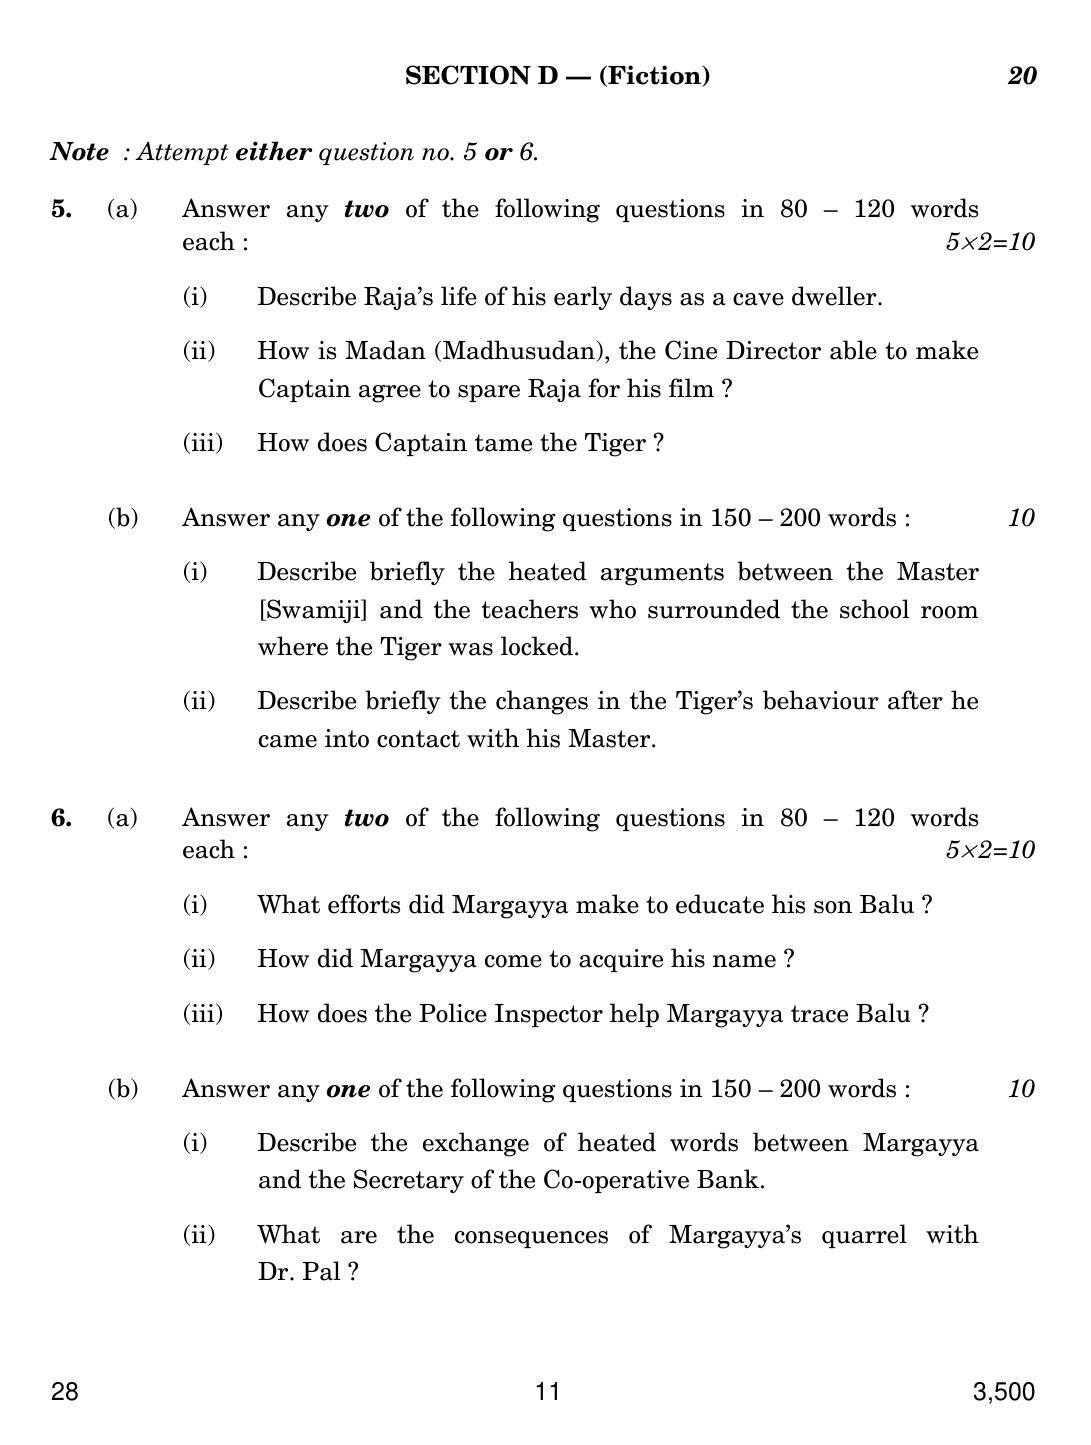 CBSE Class 12 28 ENGLISH ELECTIVE NCERT 2018 Question Paper - Page 11